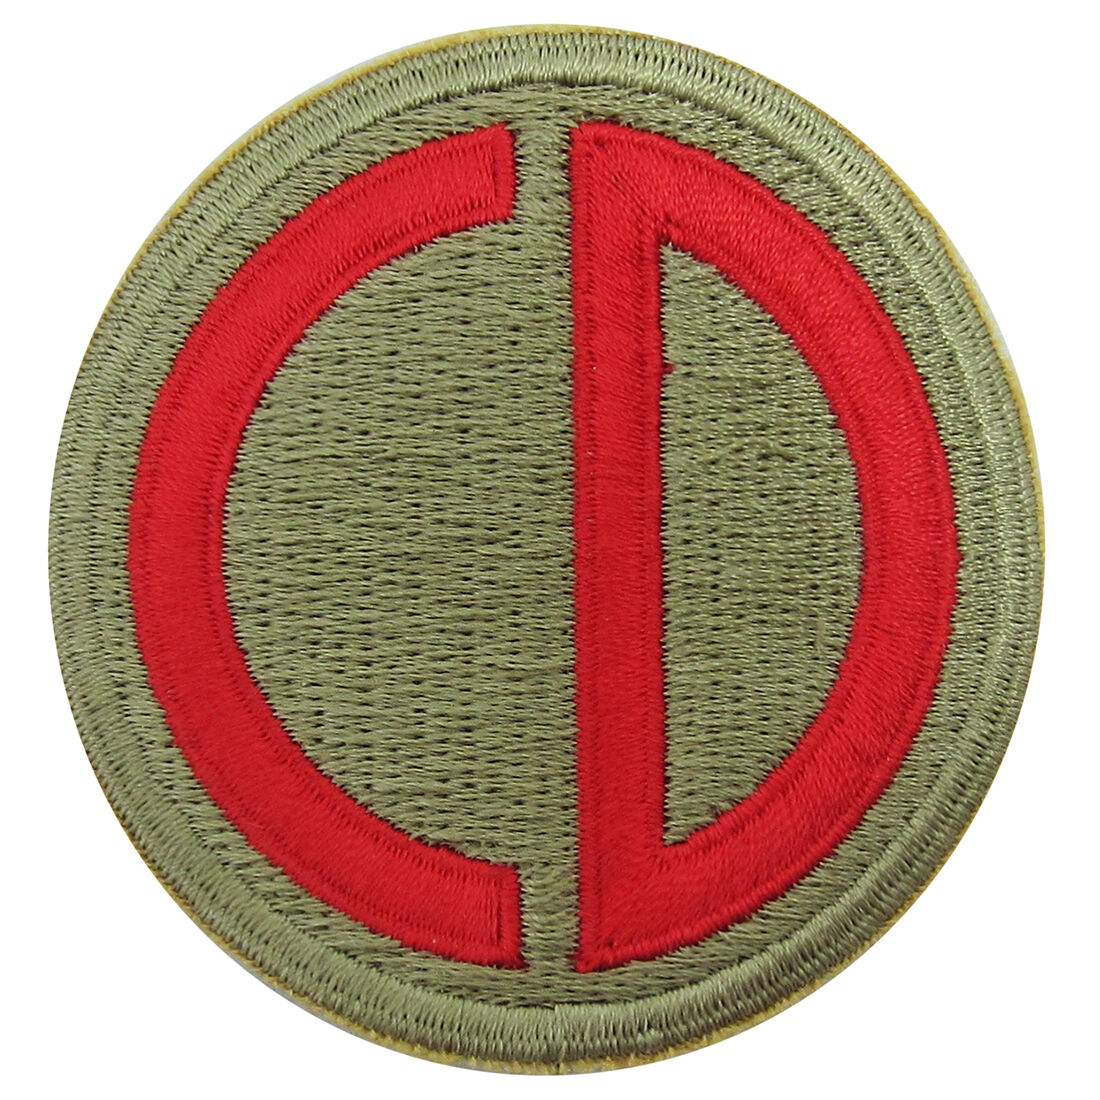 WW2 US AMERICAN 85TH INFANTRY DIVISION Uniform PATCH CD Custer Division Repro